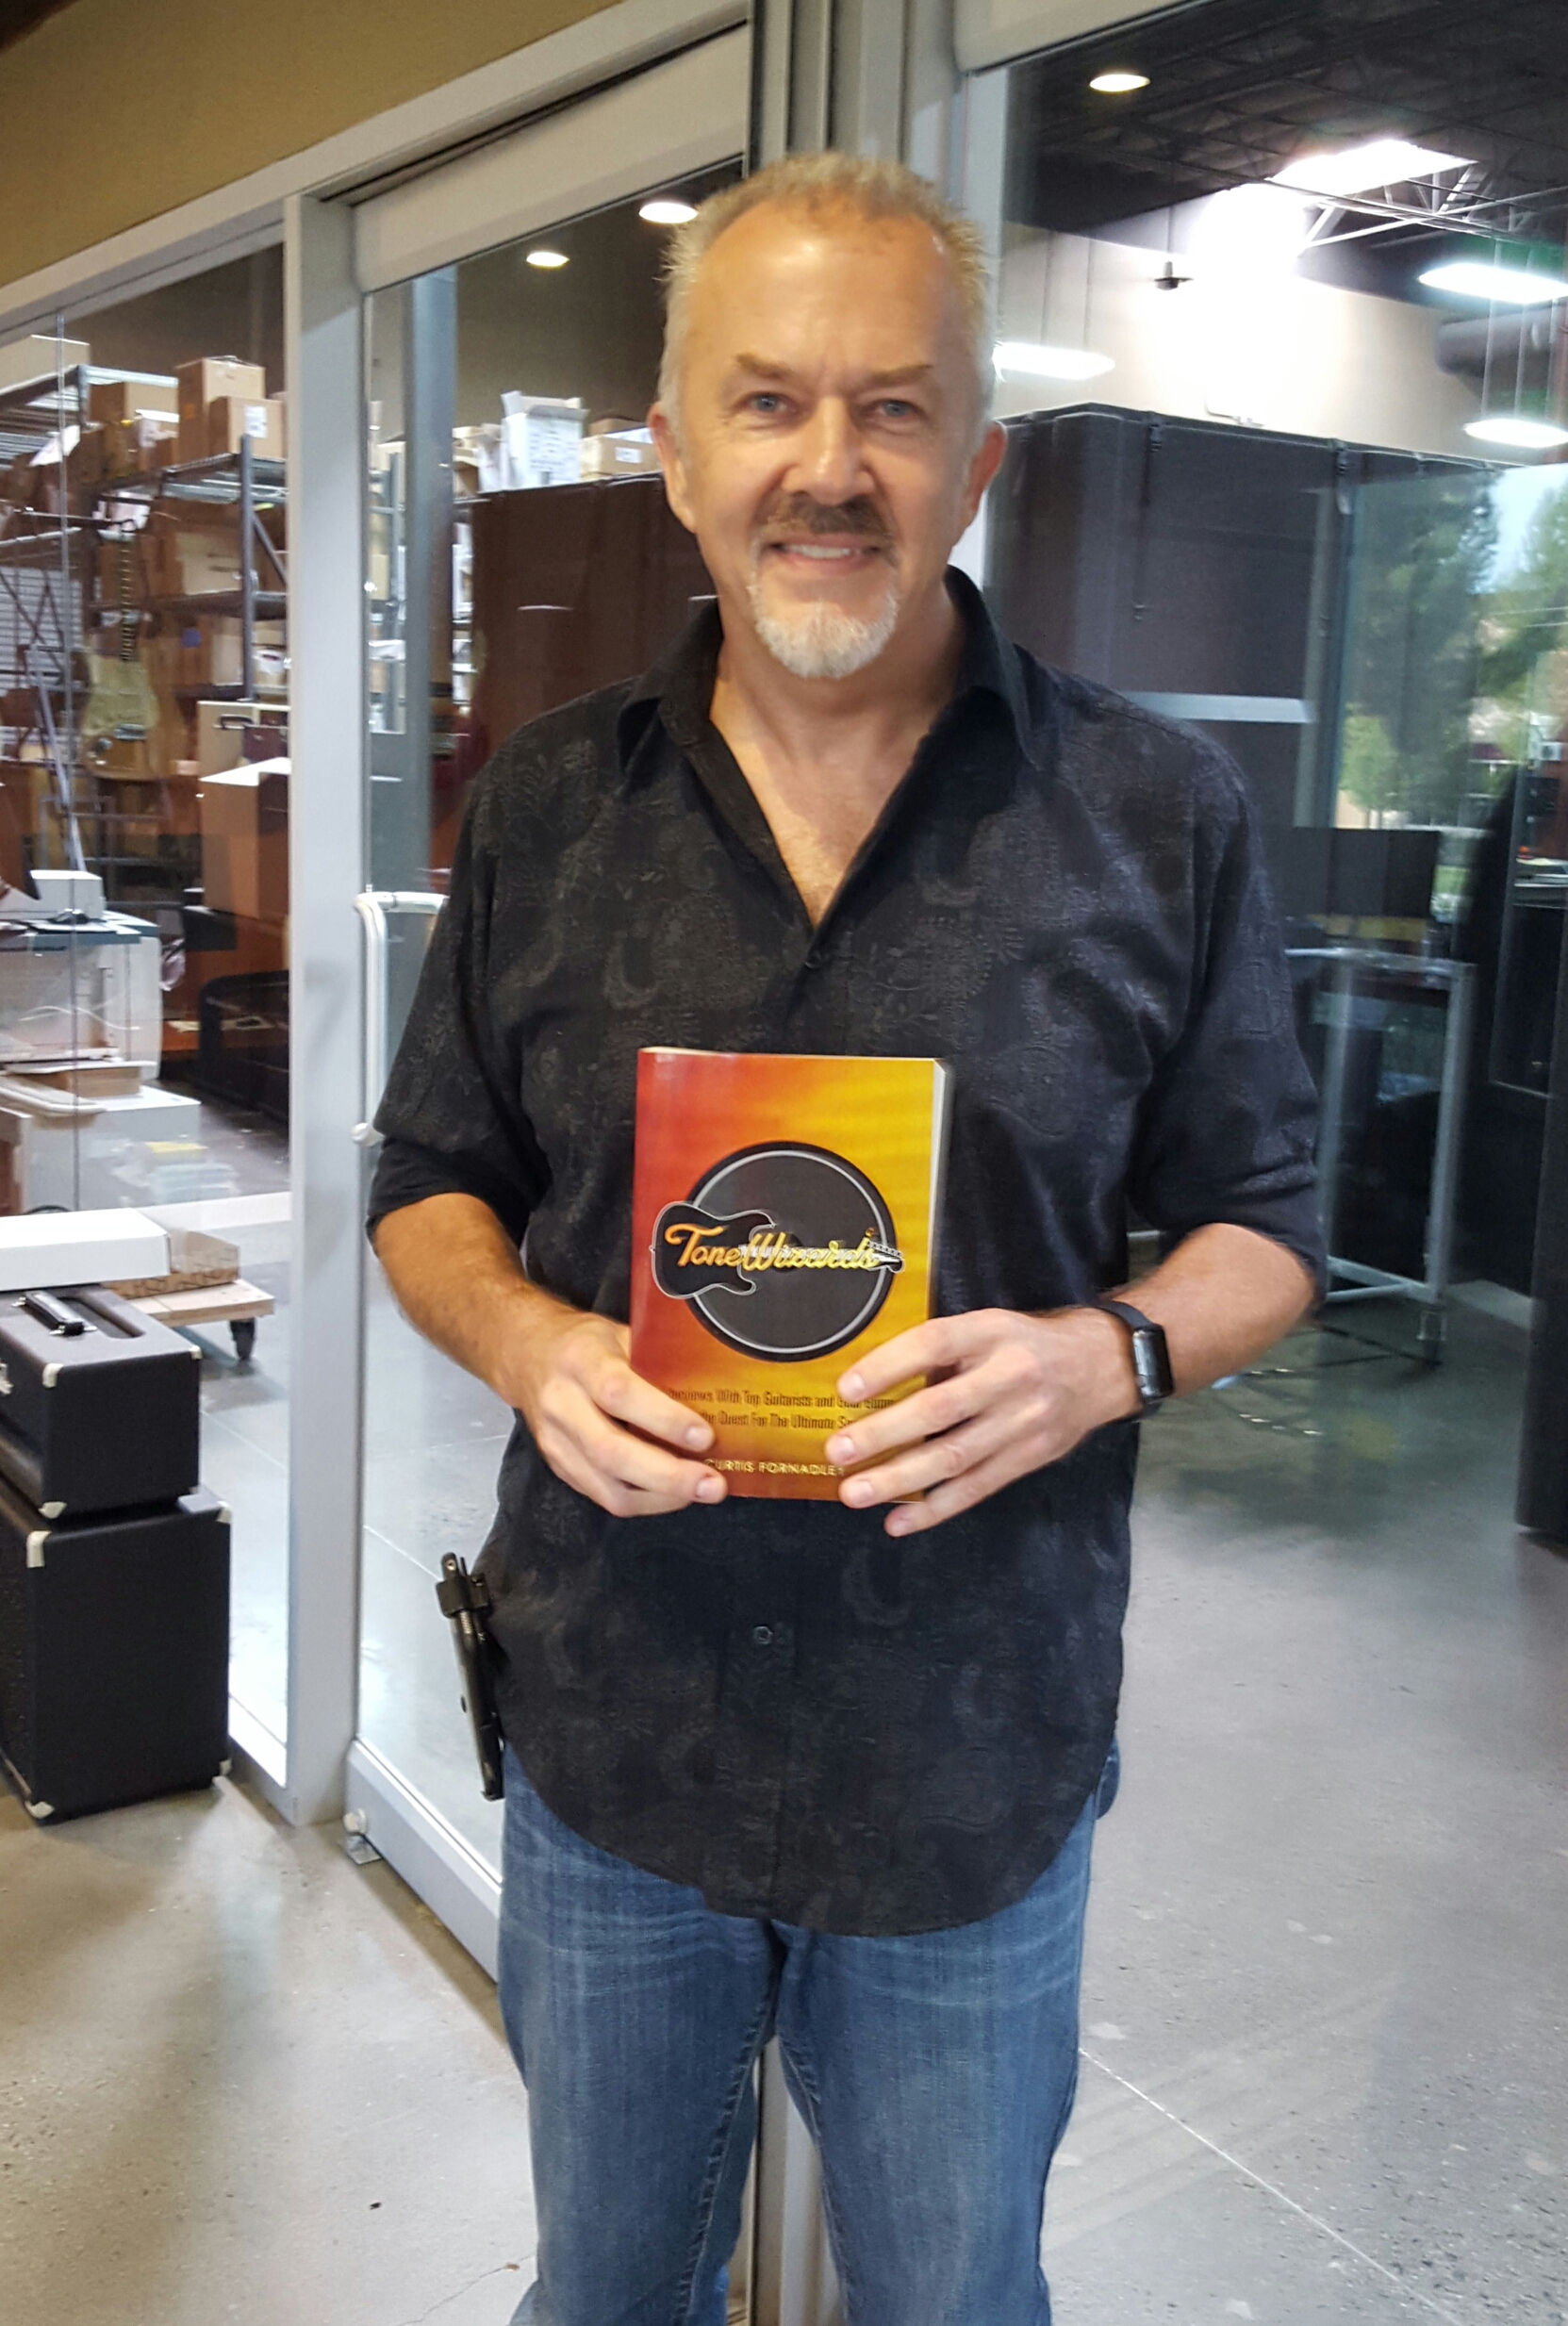 John Suhr with his copy of Tone Wizards